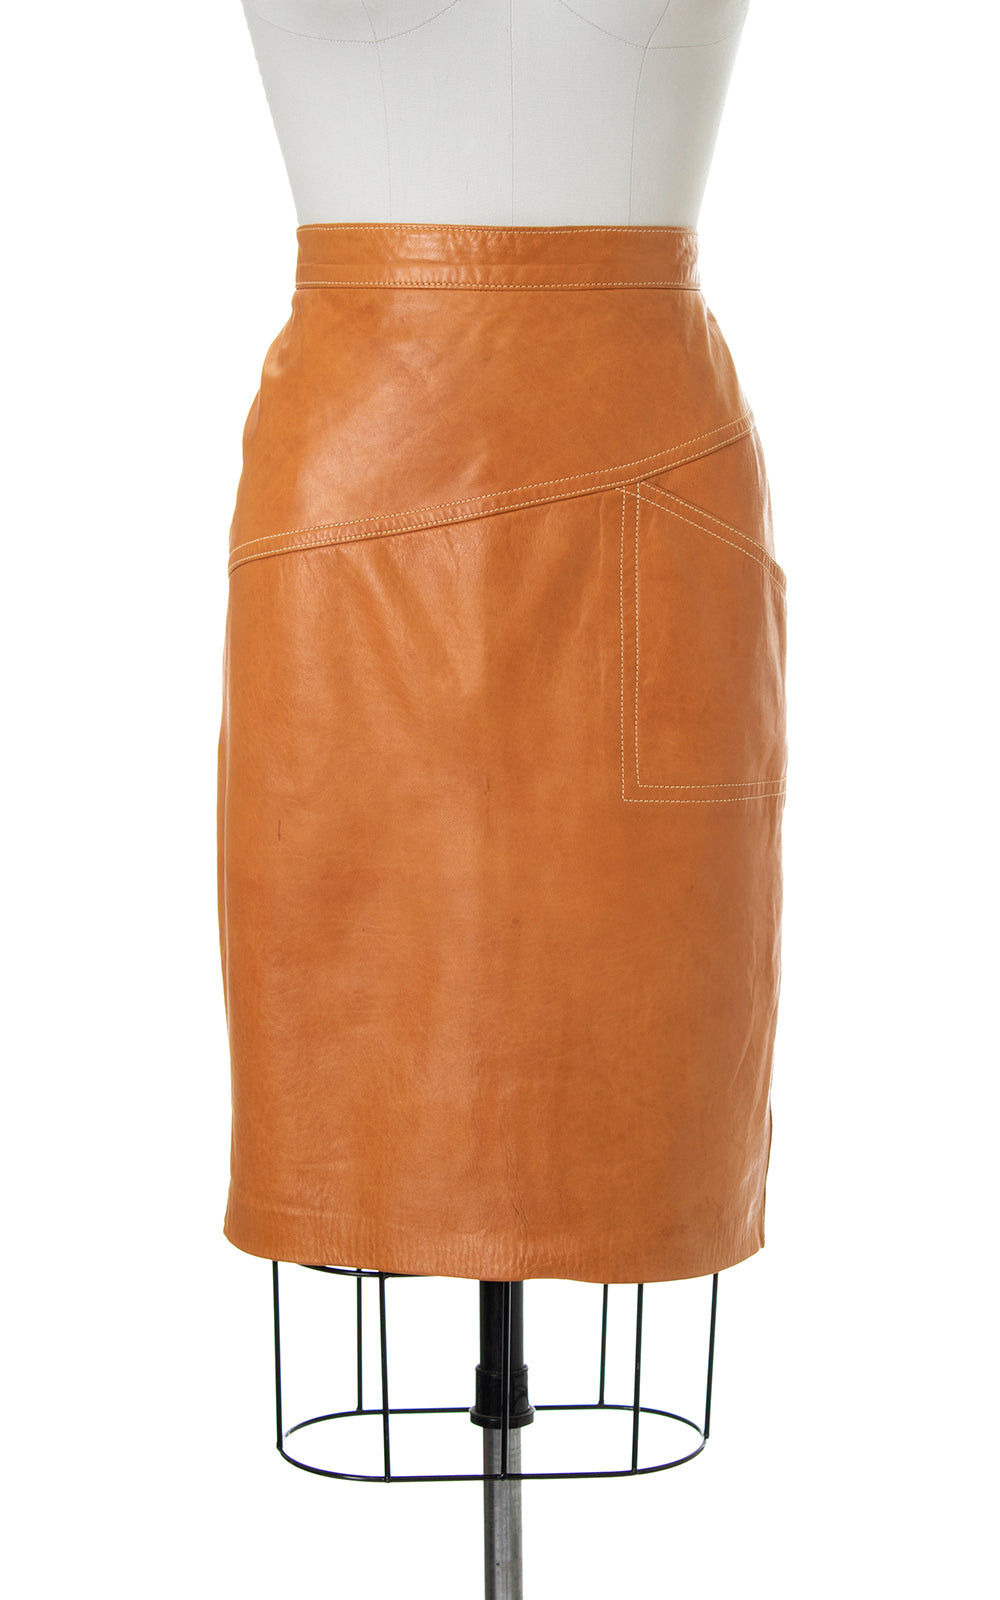 Vintage 1980s ESCADA Buttery Brown Leather Pencil Skirt with Pocket by Birthday Life Vintage